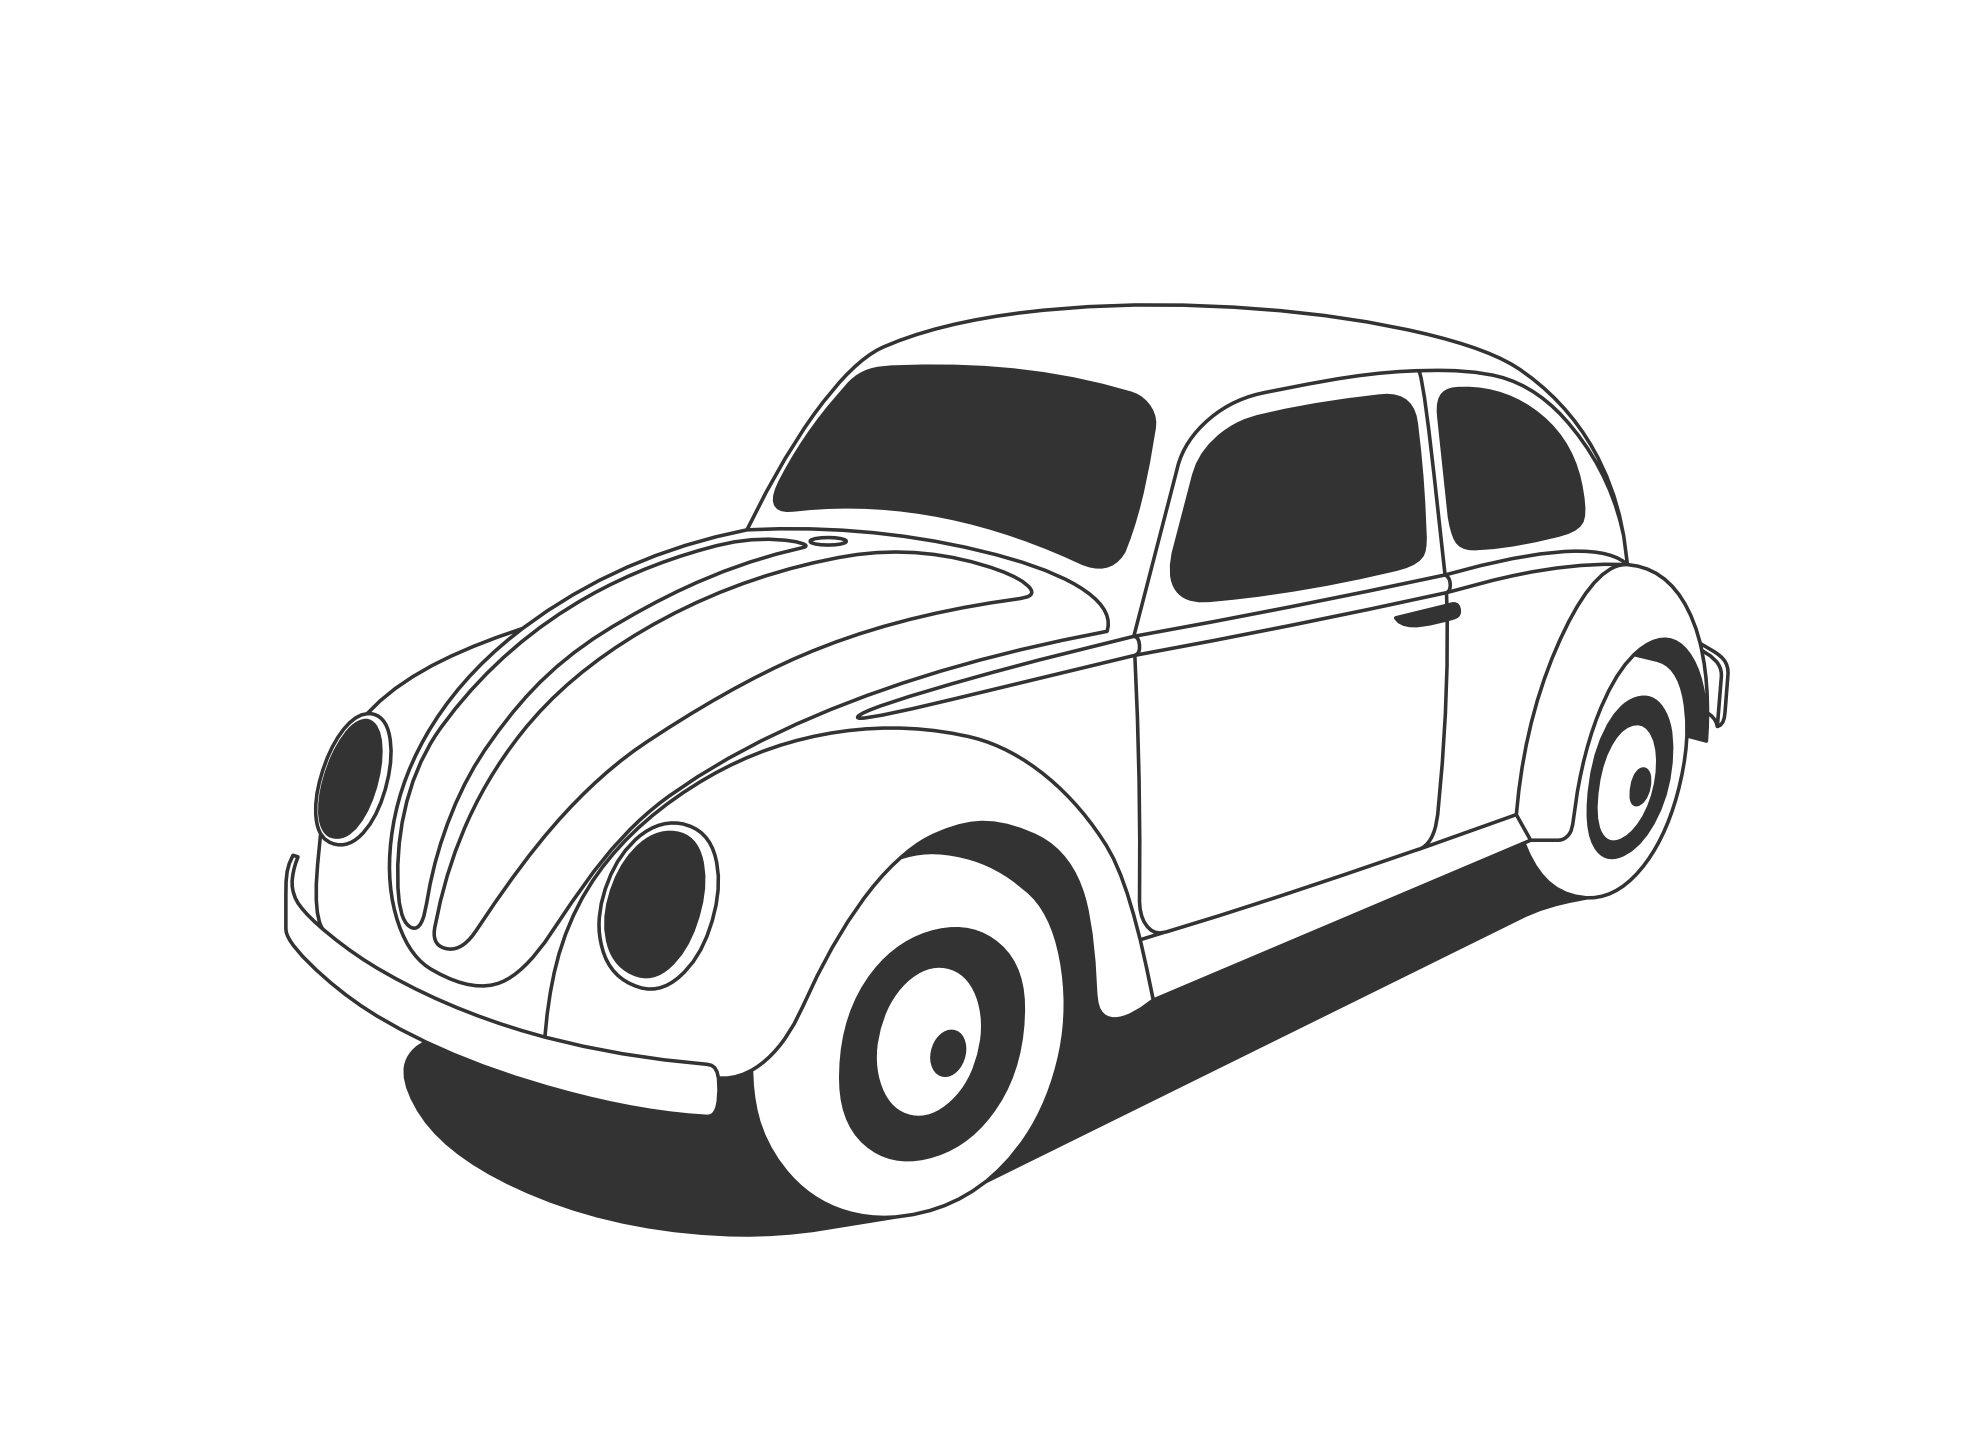 Wagon clipart old fashioned. Classic cliparts printables pinterest